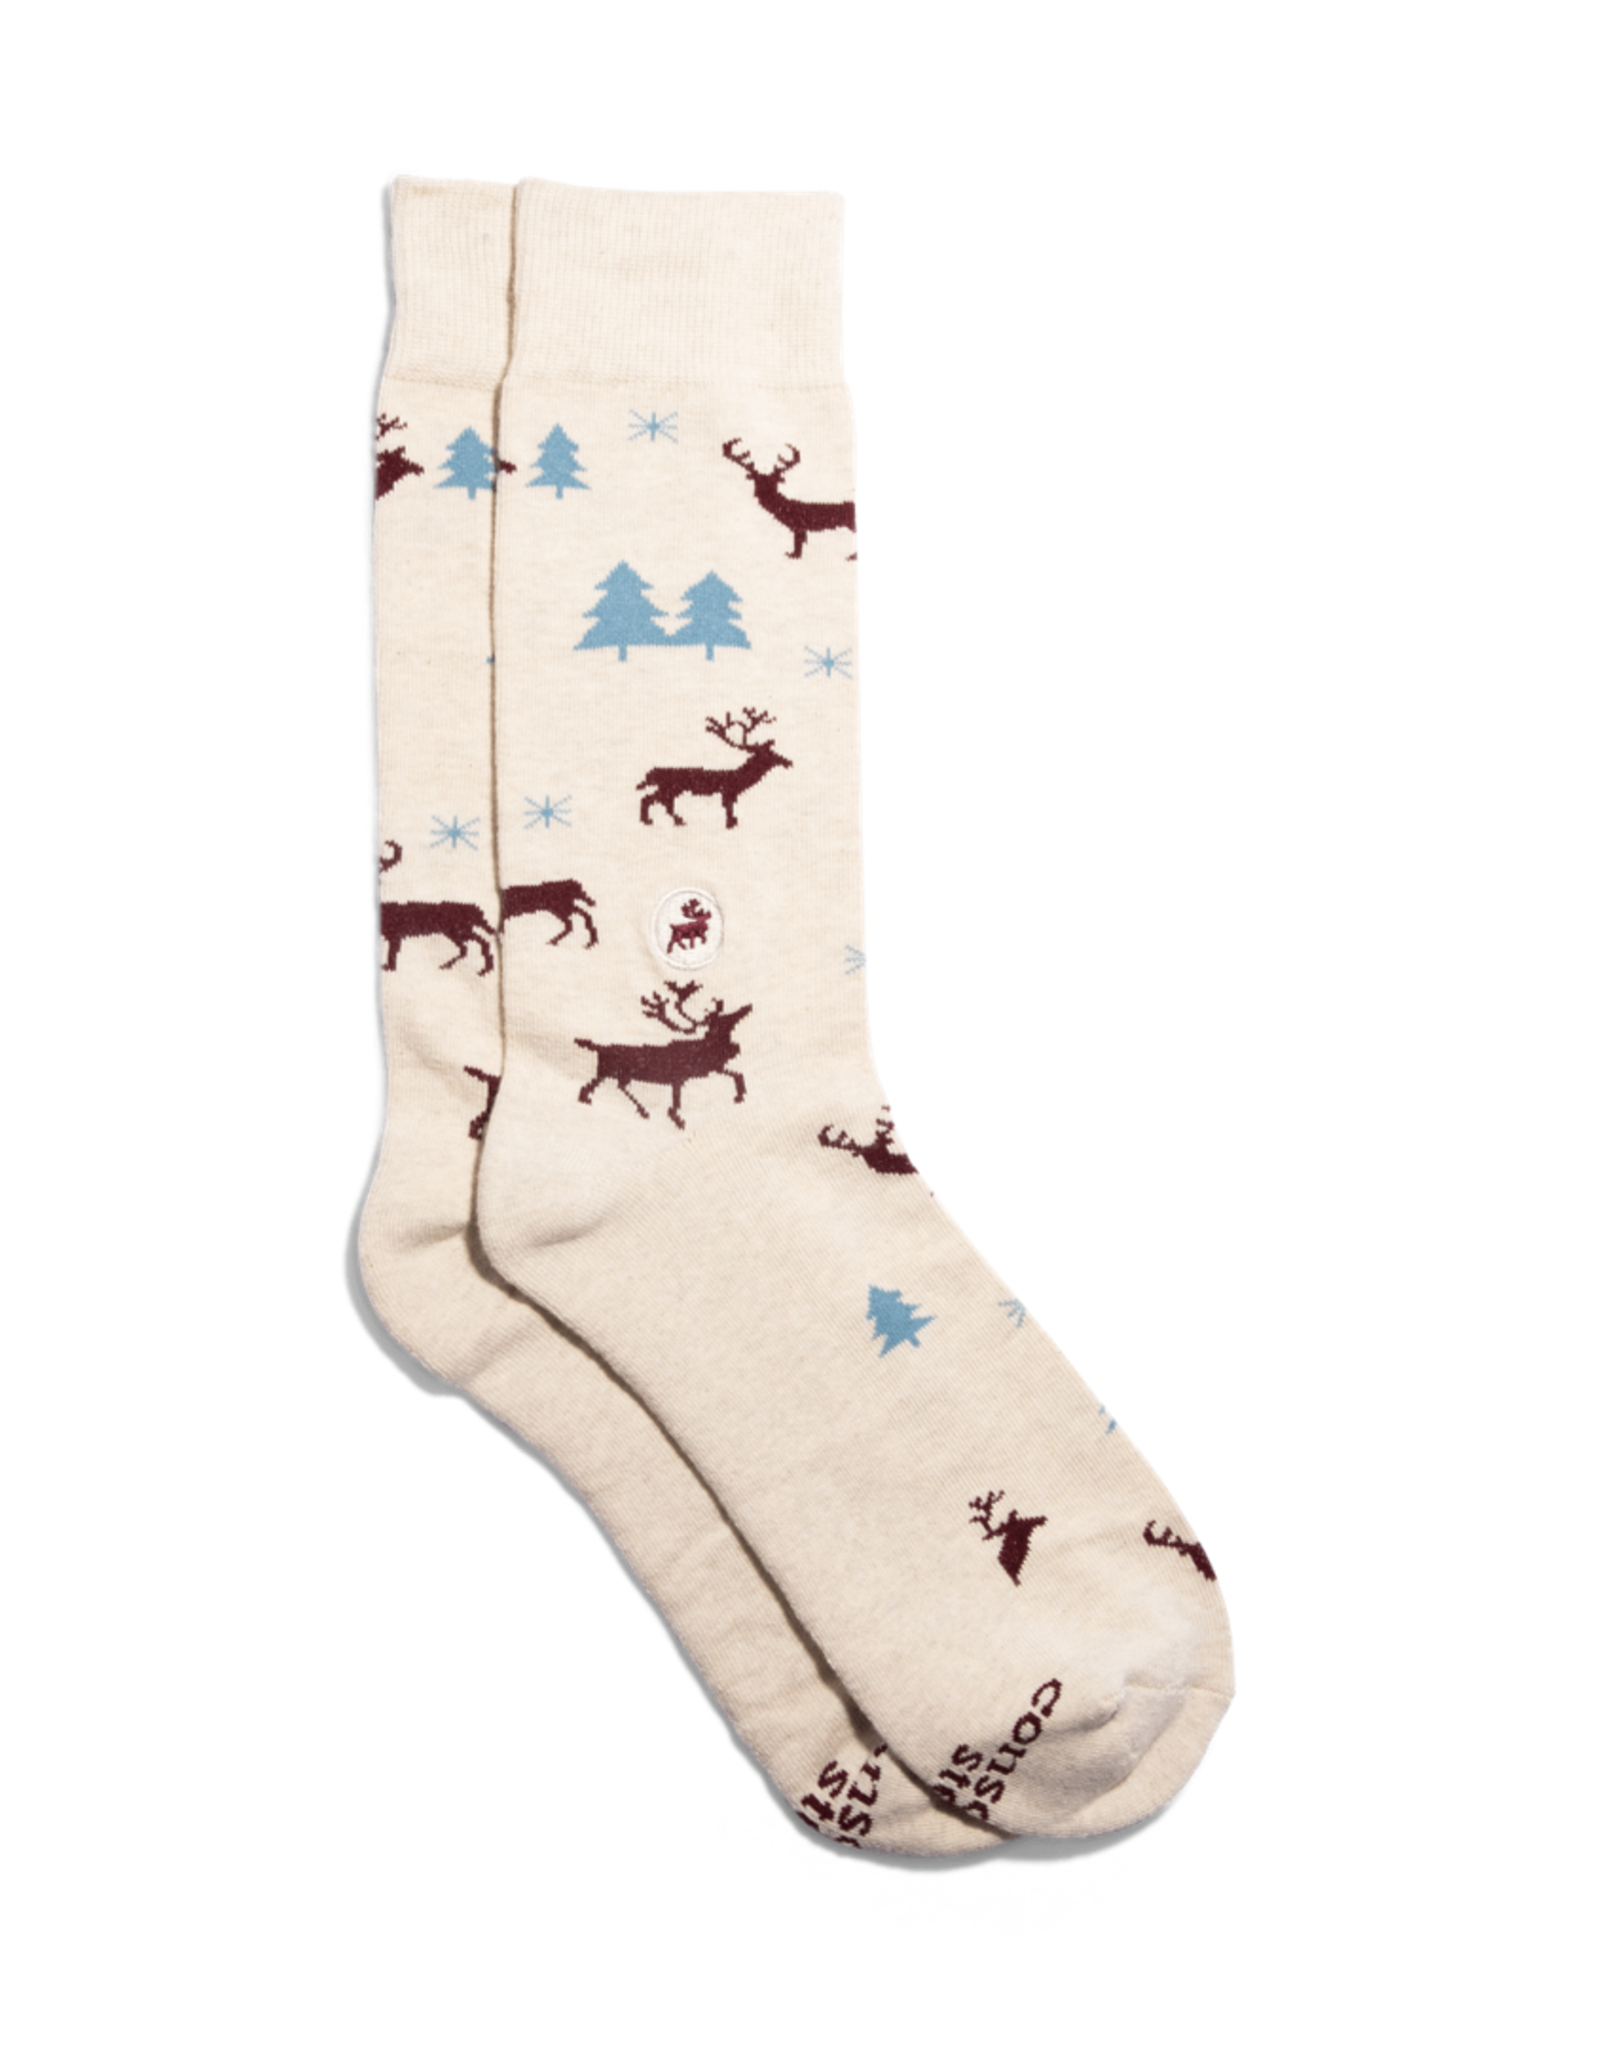 Conscious Step Socks that Protect the Arctic - Caribou